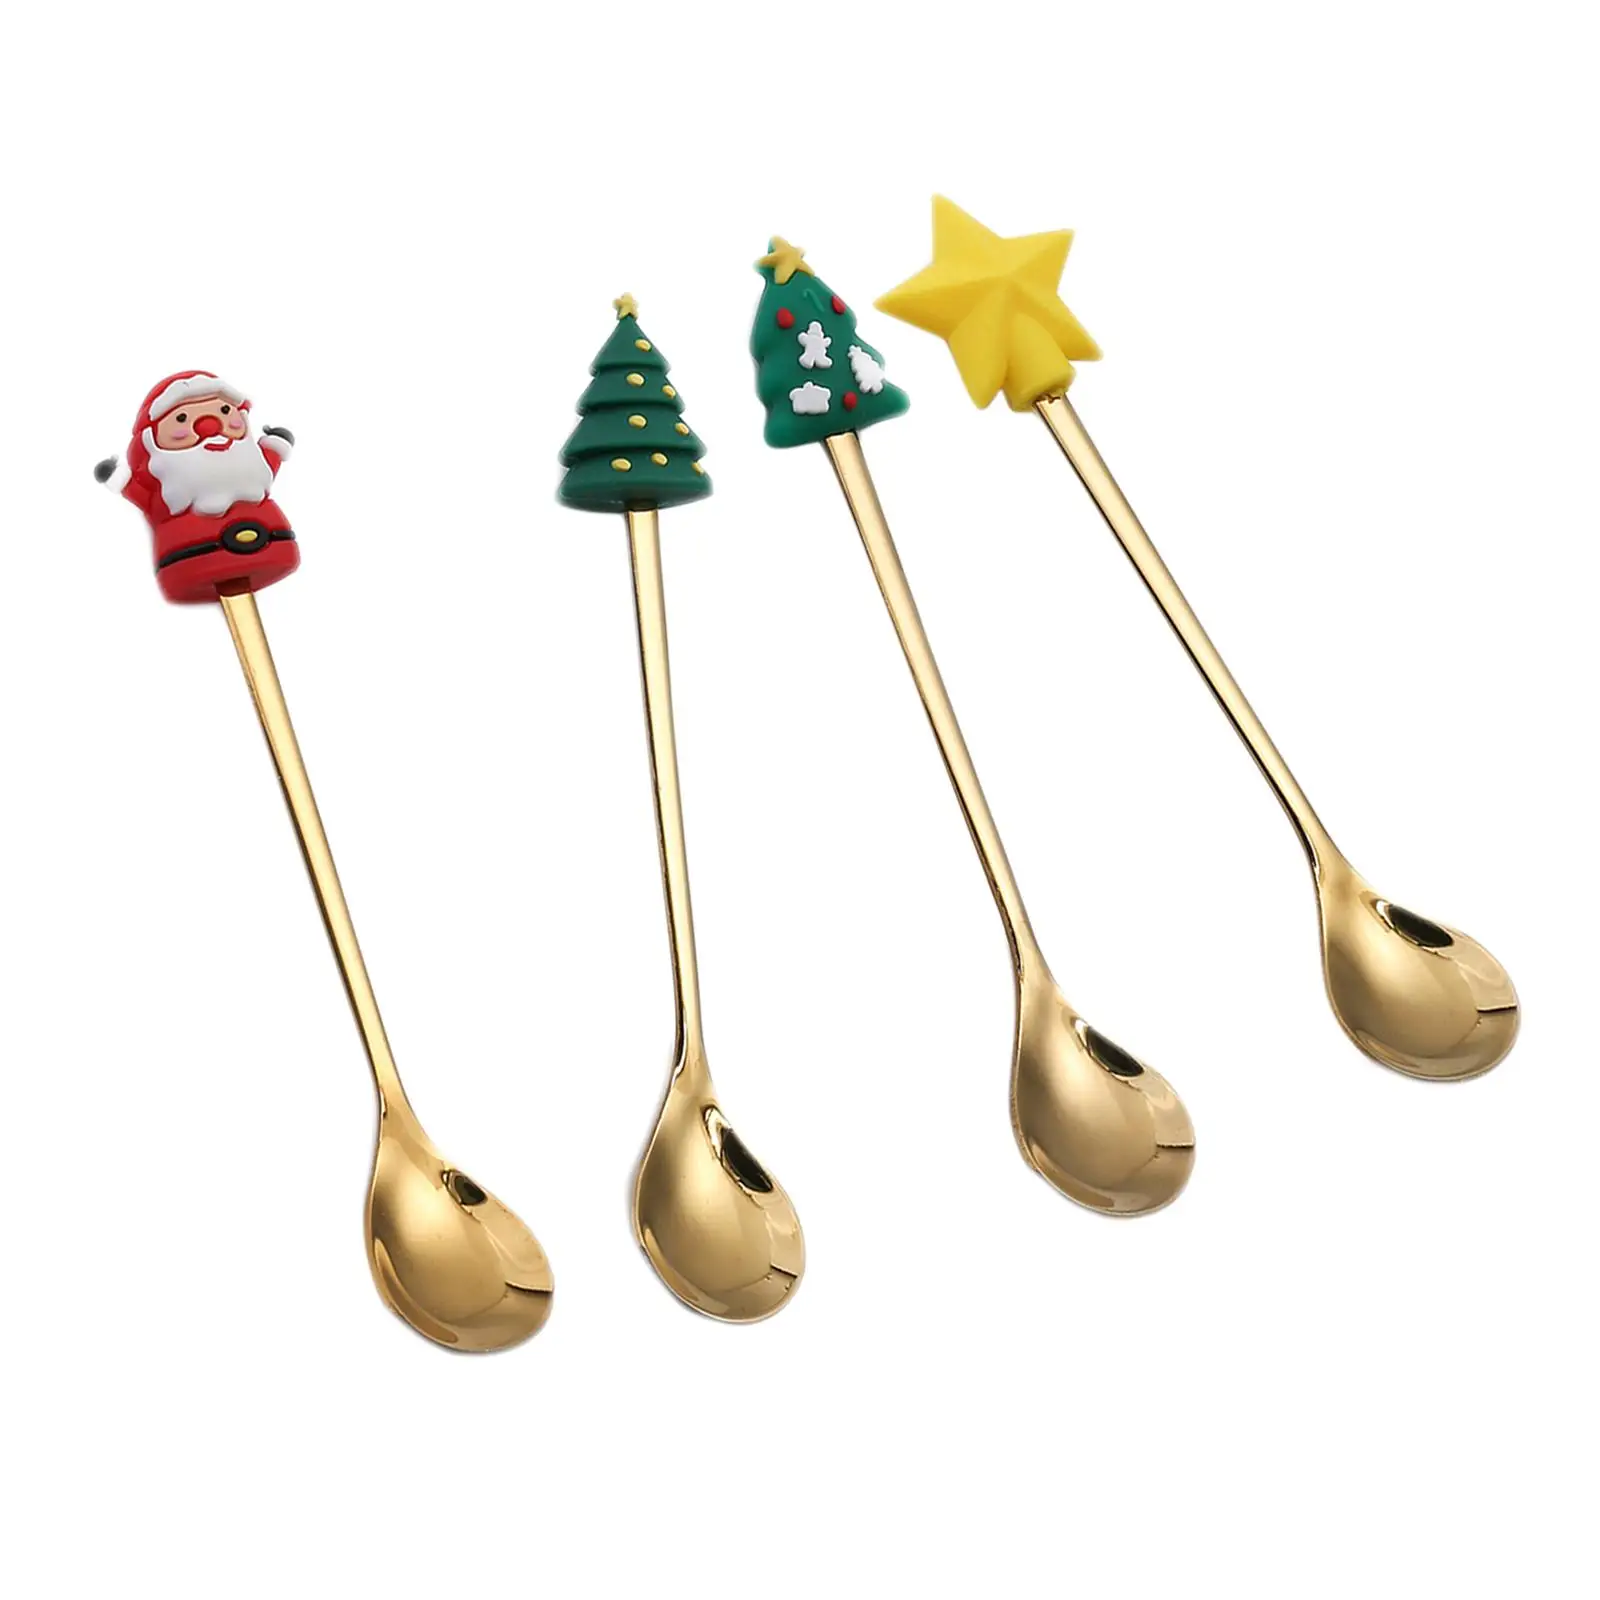 4Pcs Christmas Table Decorations Soup Dessert Spoon Tea Spoons decor Coffee Stirring Spoon for Daily Use Party Xmas